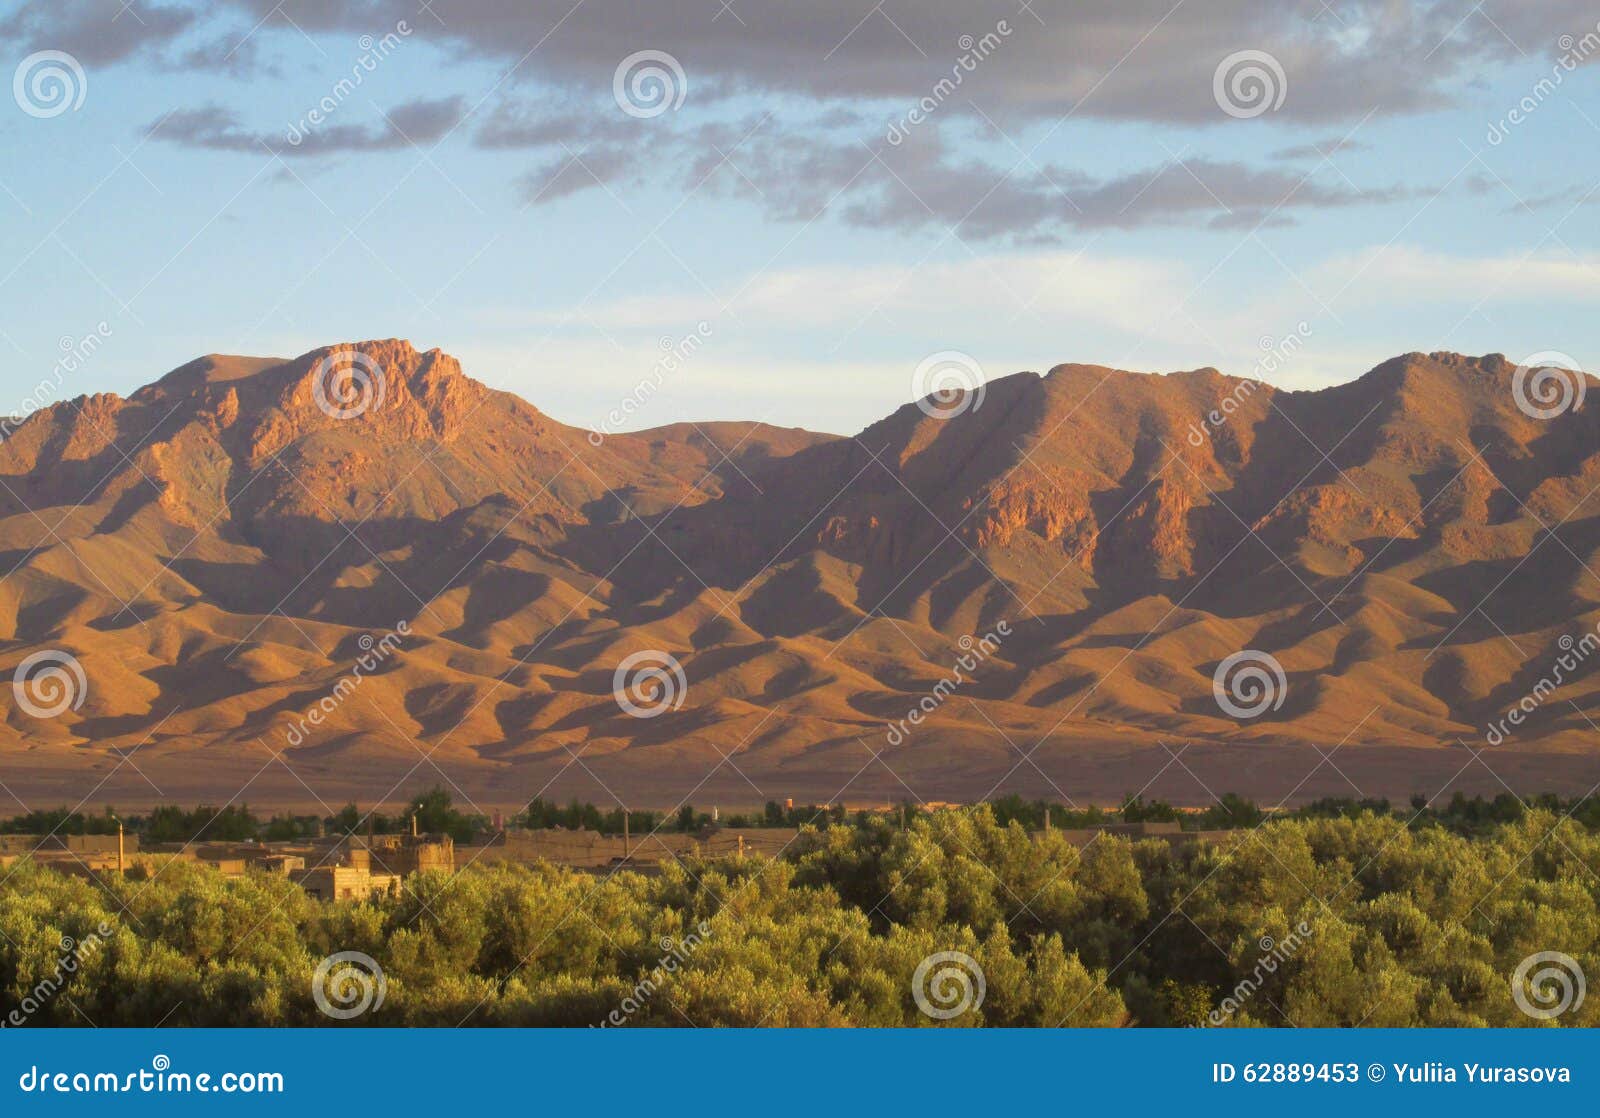 high atlas mountains view in morocco at sunset light